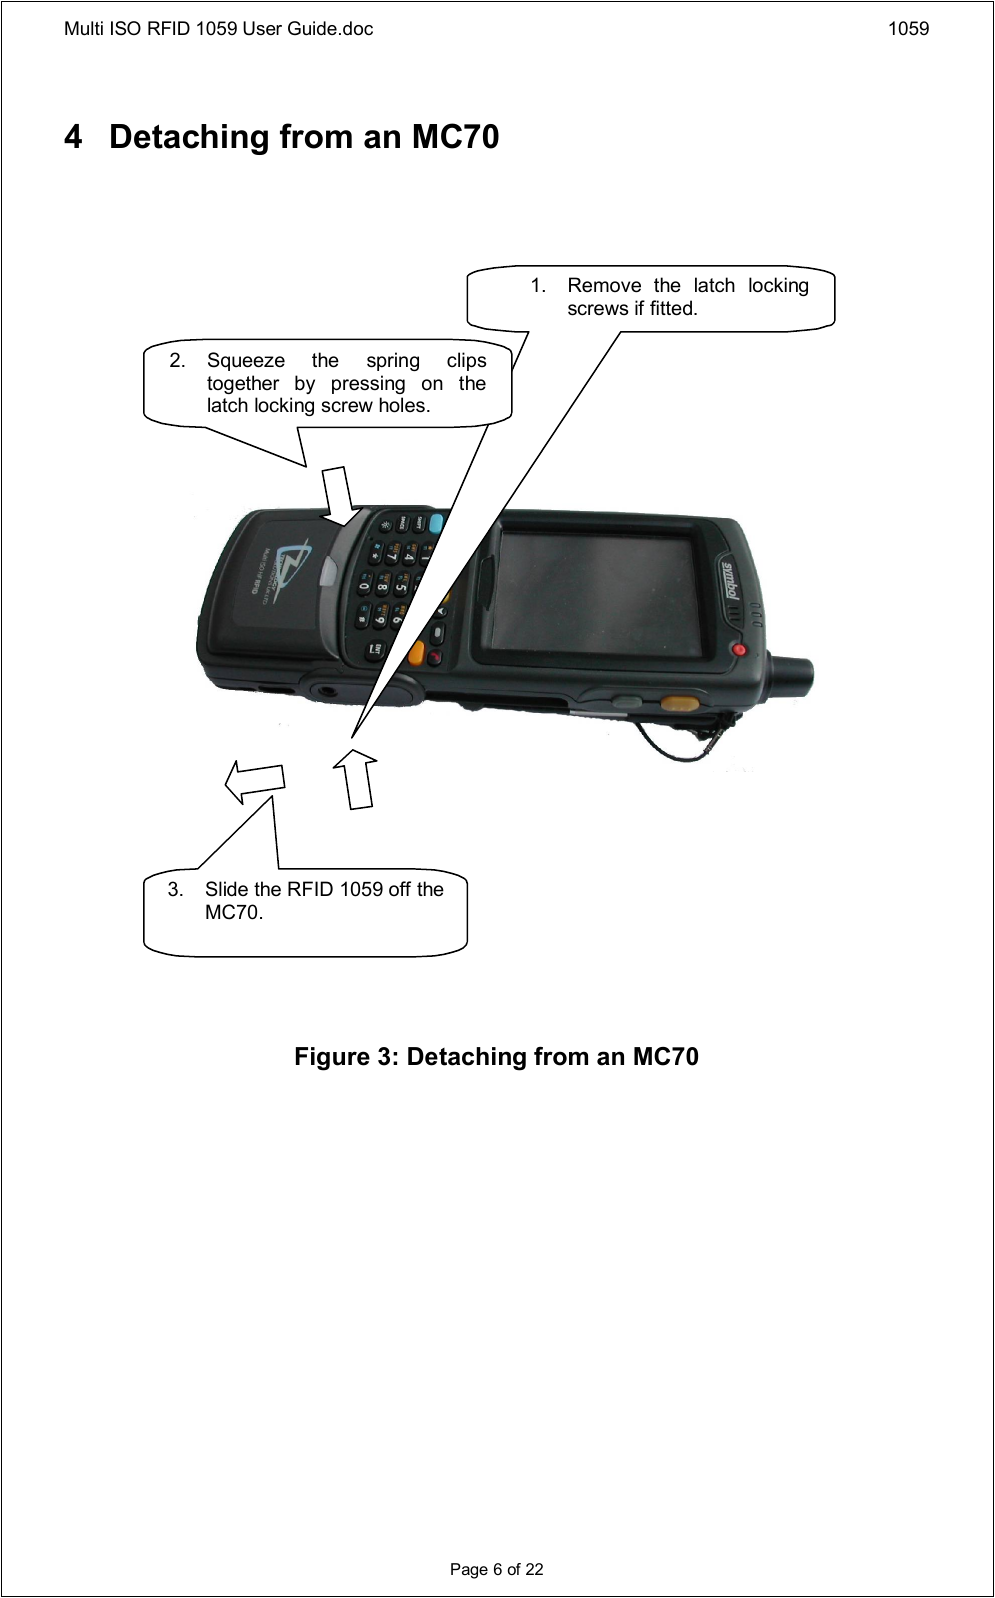 Multi ISO RFID 1059 User Guide.doc 1059Page 6 of 224 Detaching from an MC70Figure 3: Detaching from an MC701. Remove  the  latch  locking screws if fitted.2.Squeeze  the  spring  clips together  by  pressing  on  the latch locking screw holes.3.Slide the RFID 1059 off the MC70.